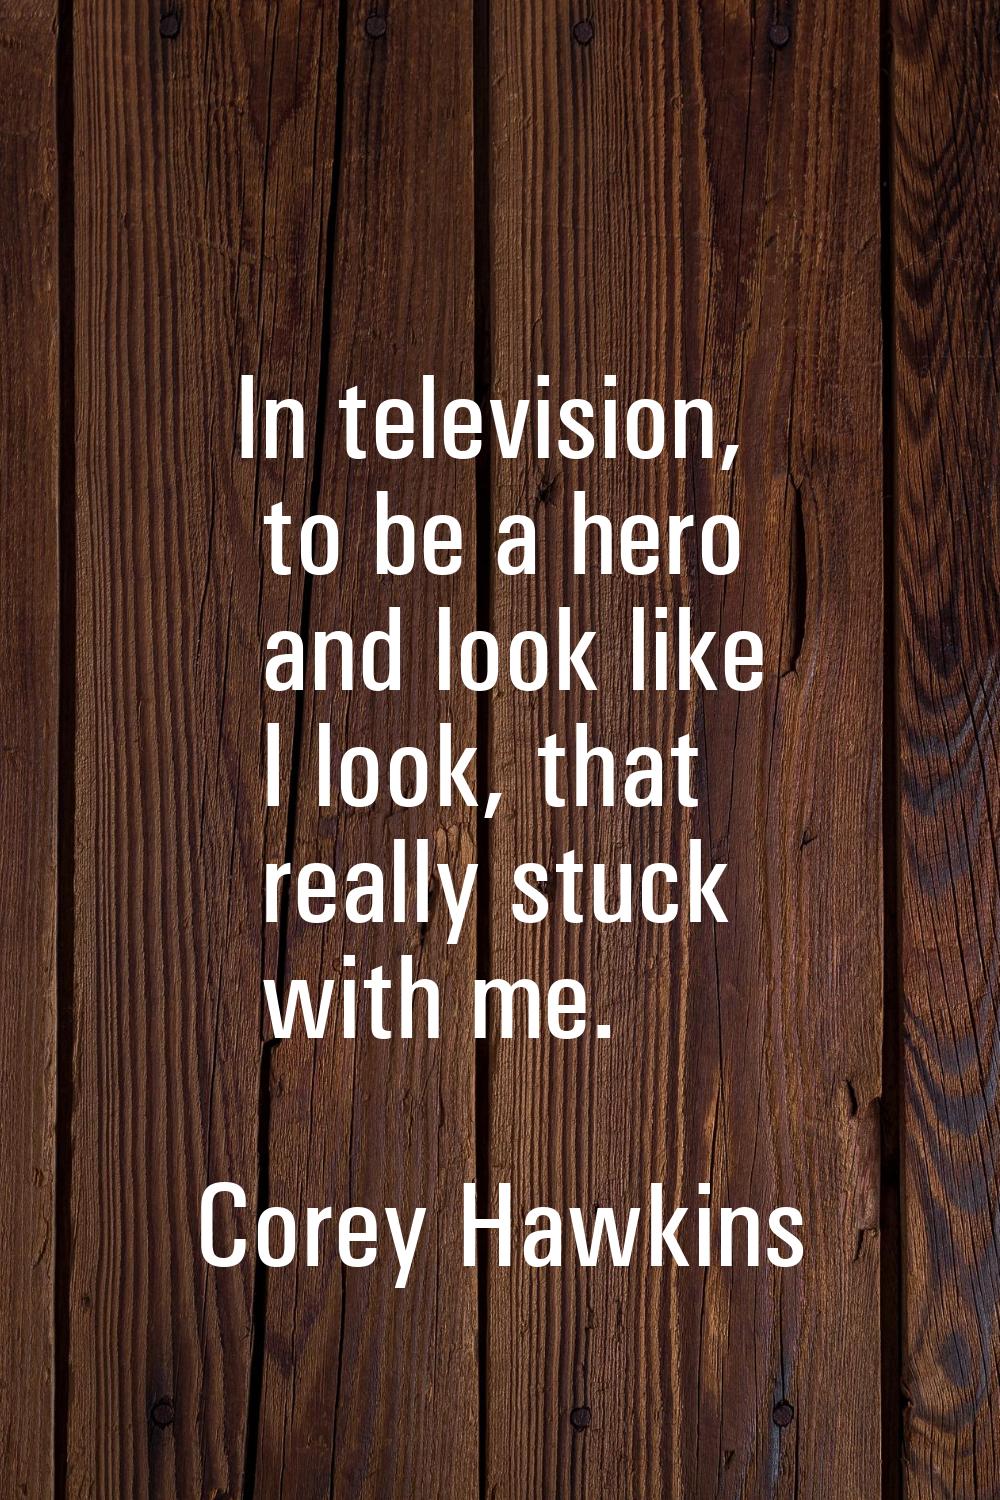 In television, to be a hero and look like I look, that really stuck with me.